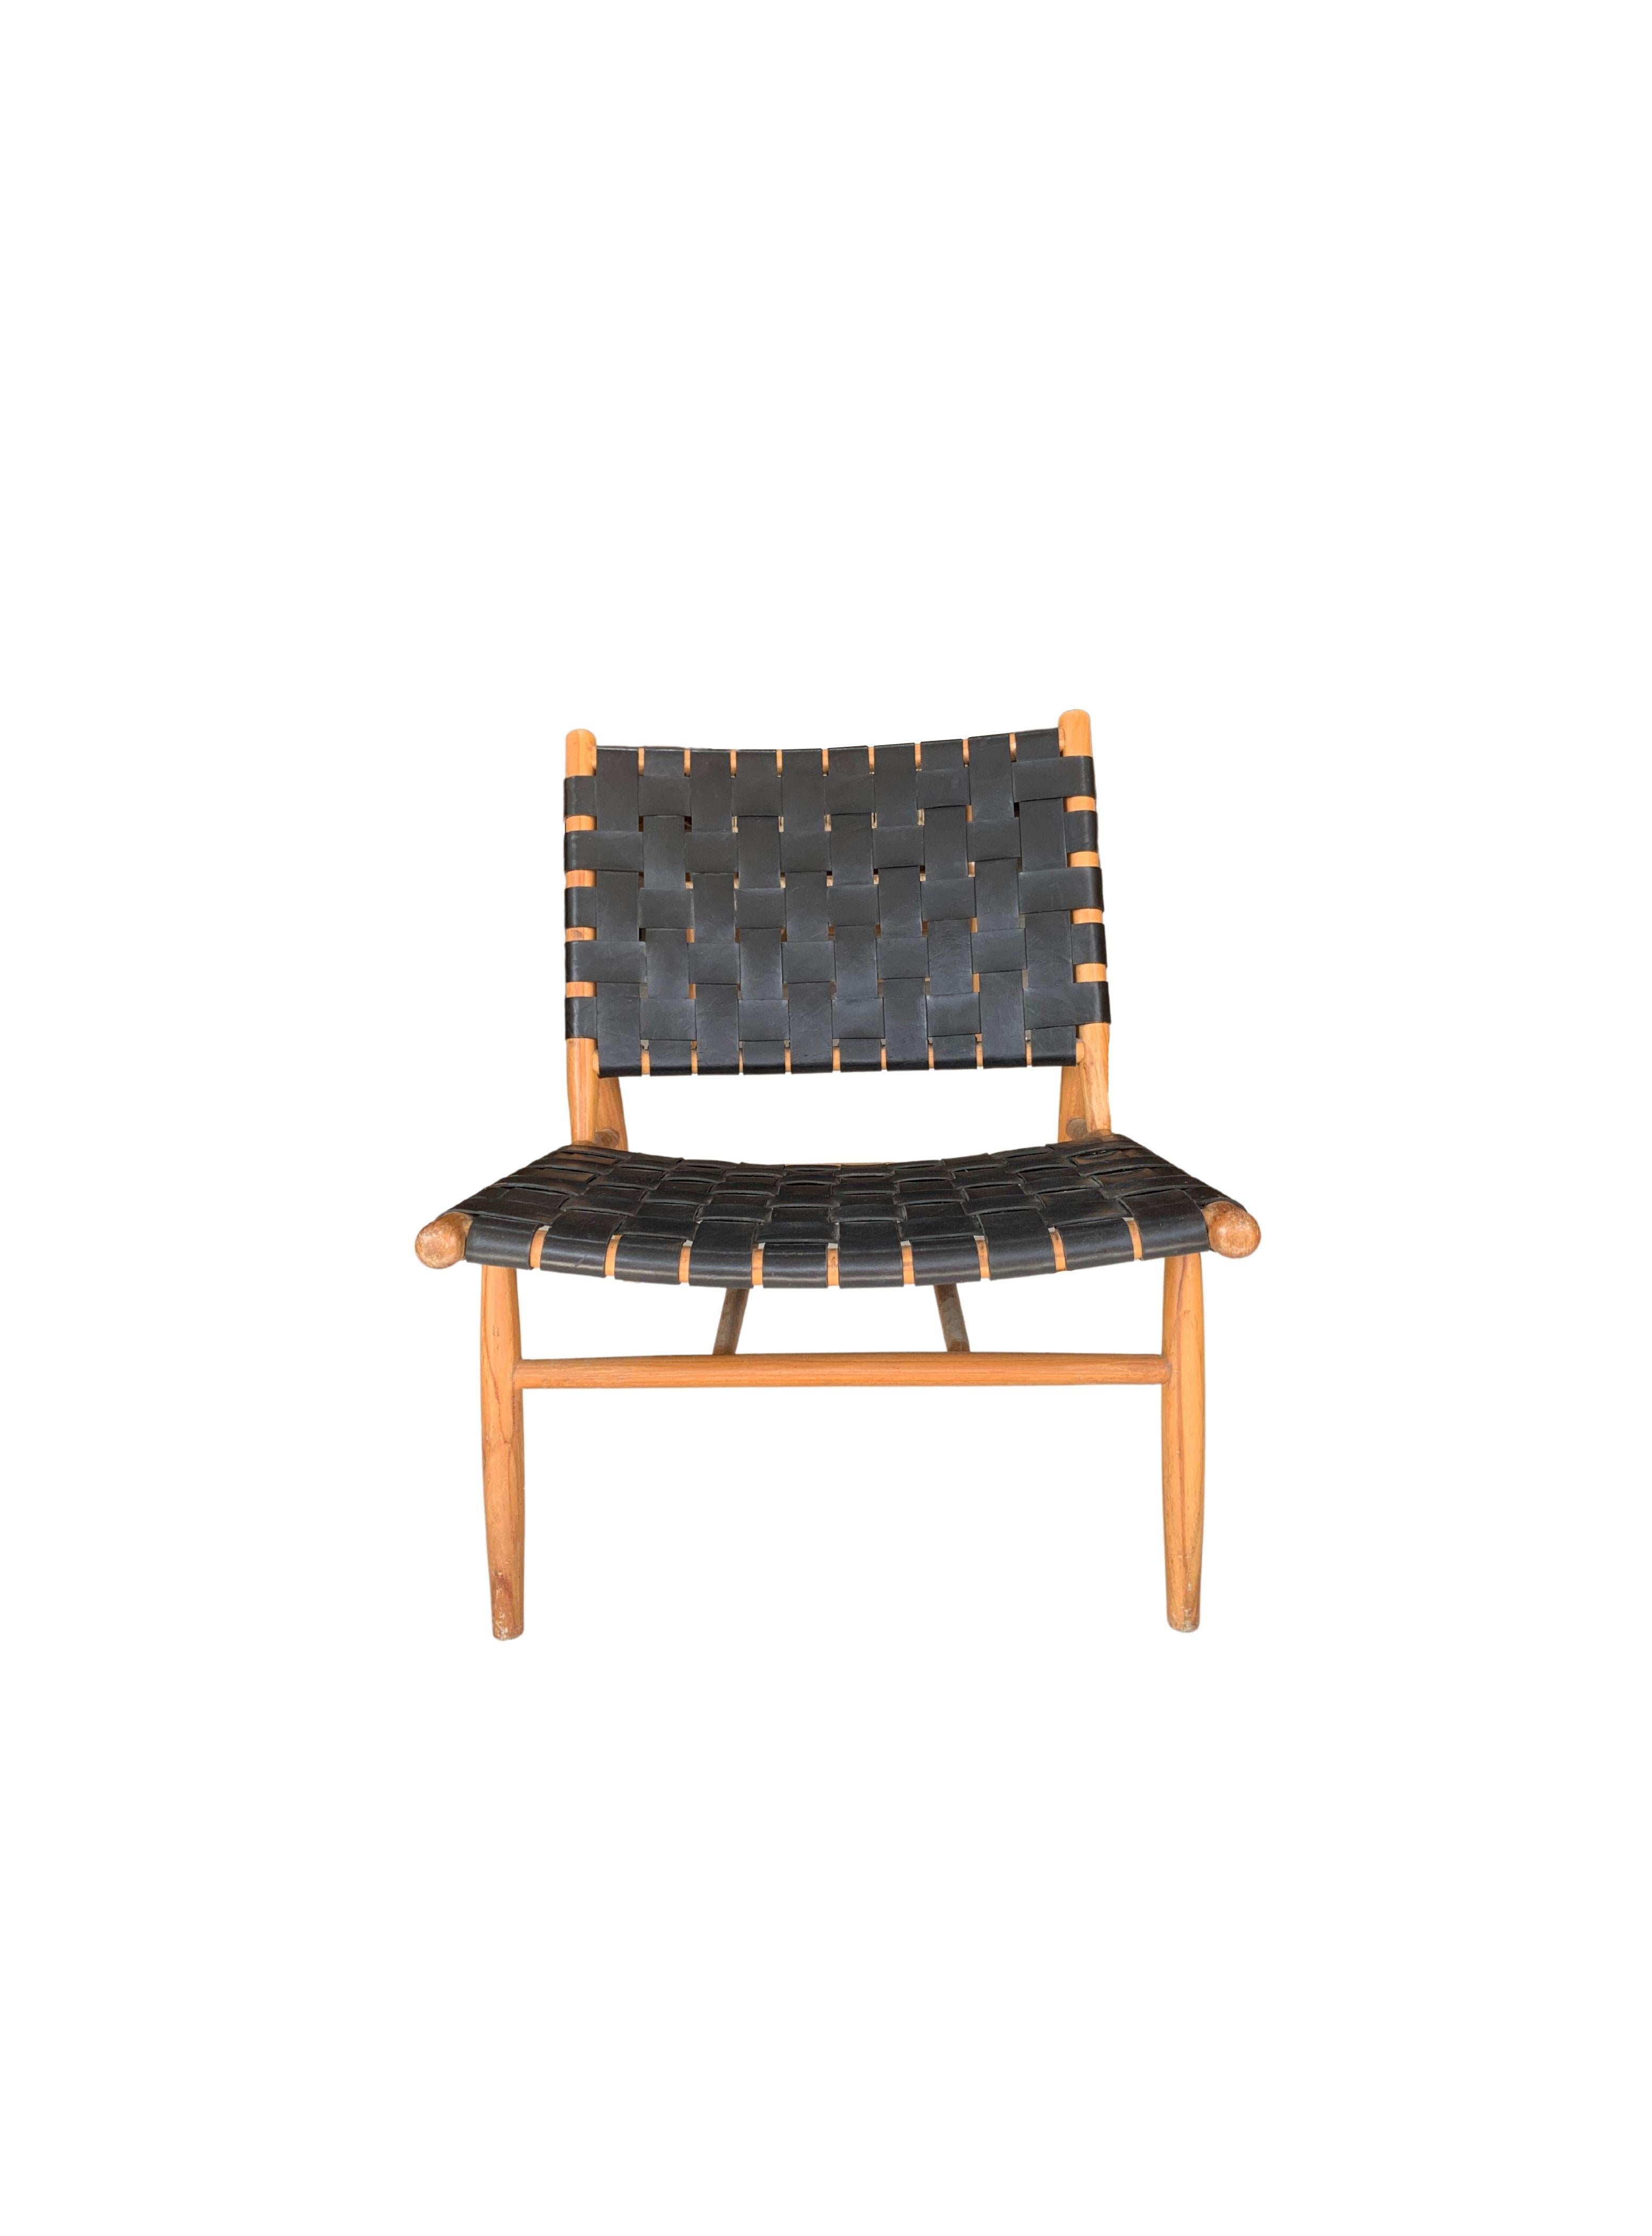 A hand-crafted teak framed & woven leather strap lounger chair. These chairs are crafted by local artisans using a wood joinery technique without the use of nails. They feature a subtle wood texture and are robust and sturdy.